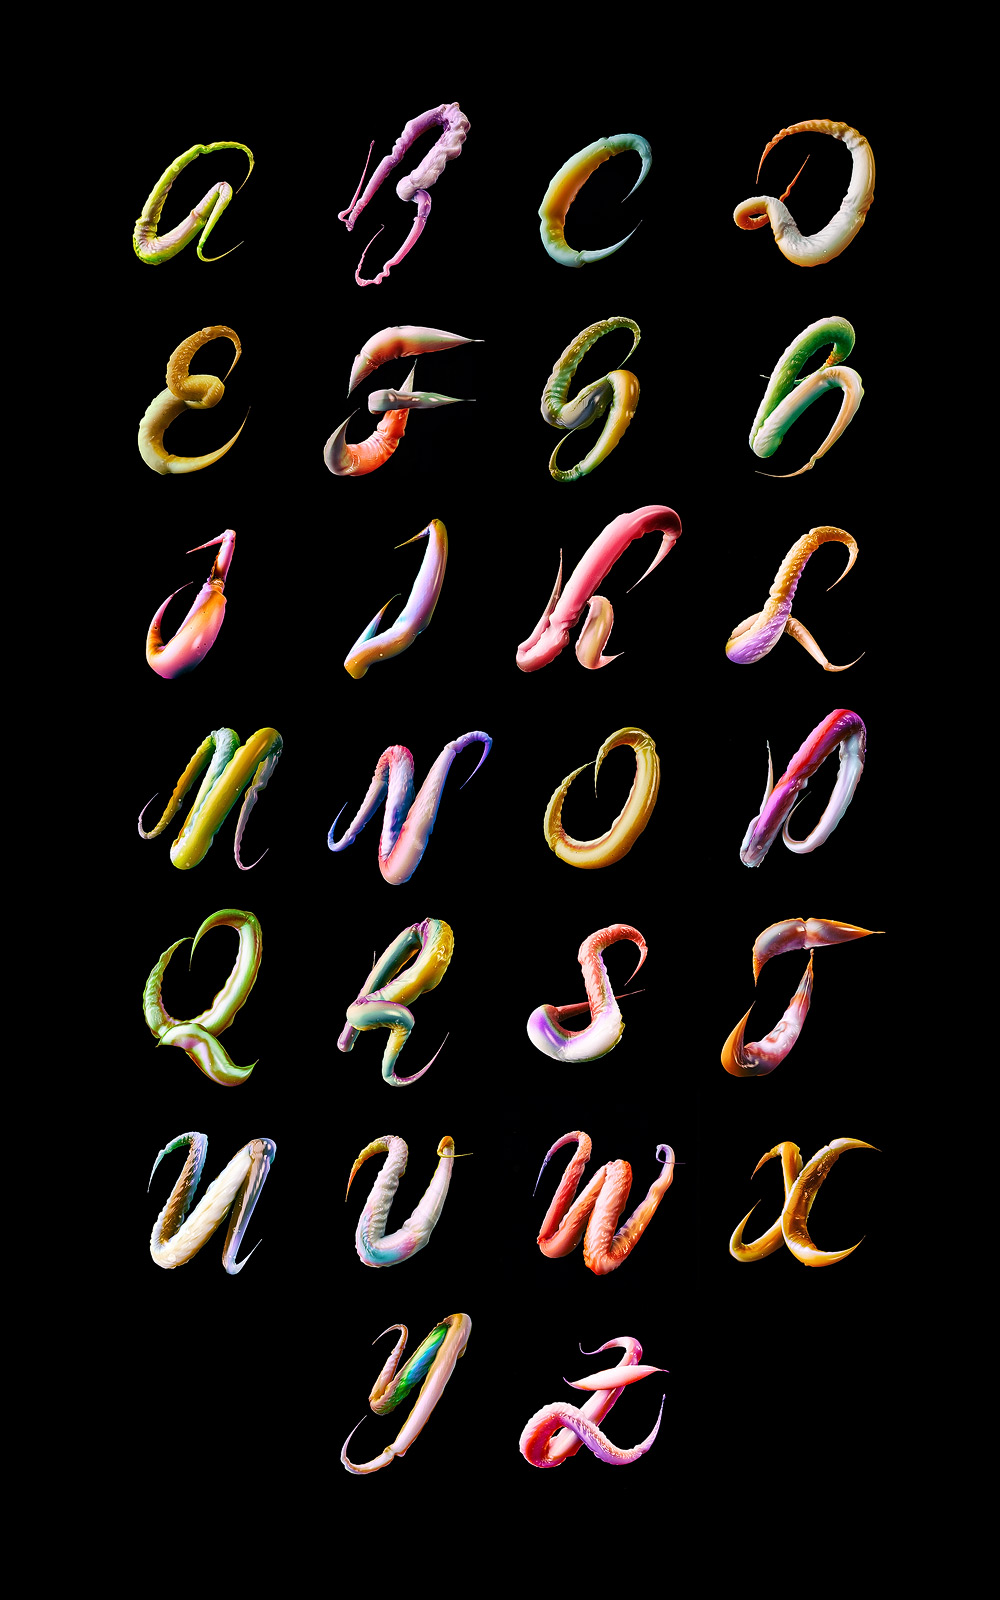 Each Letter Of This Alphabet Moves Like An Appendage Of An Animal